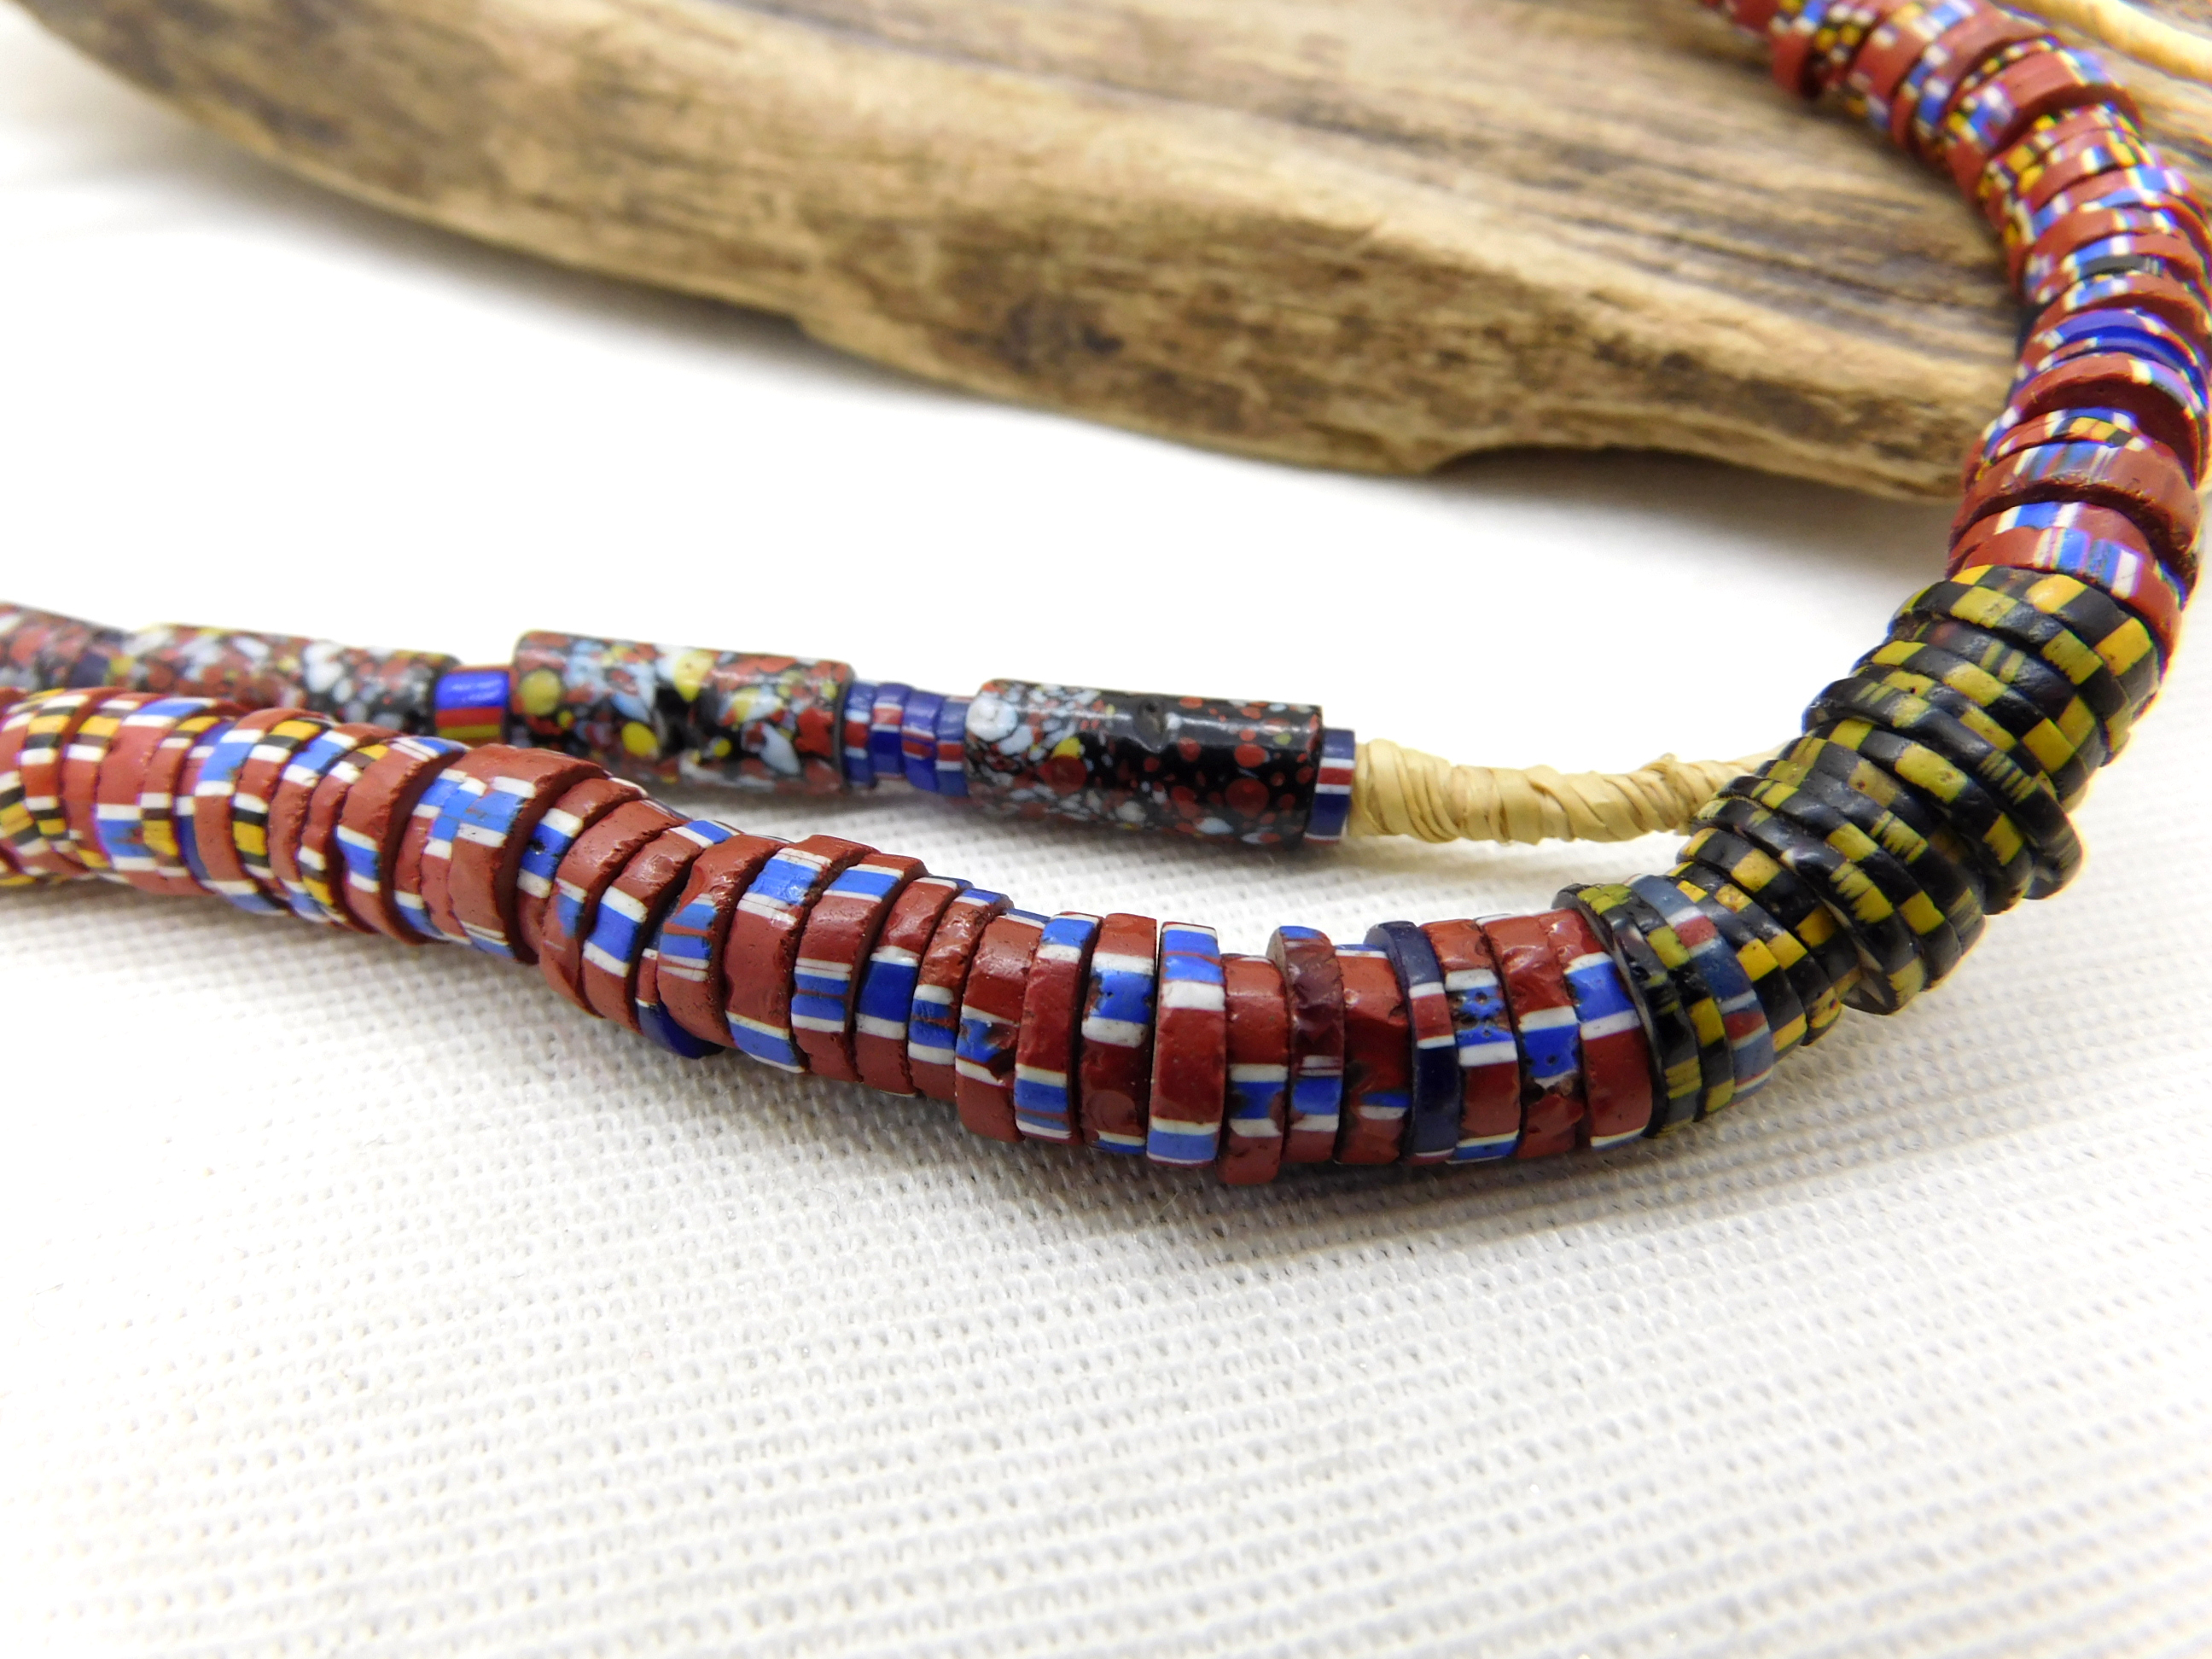 Aja beads from the African trade, vintage glass beads from Venice